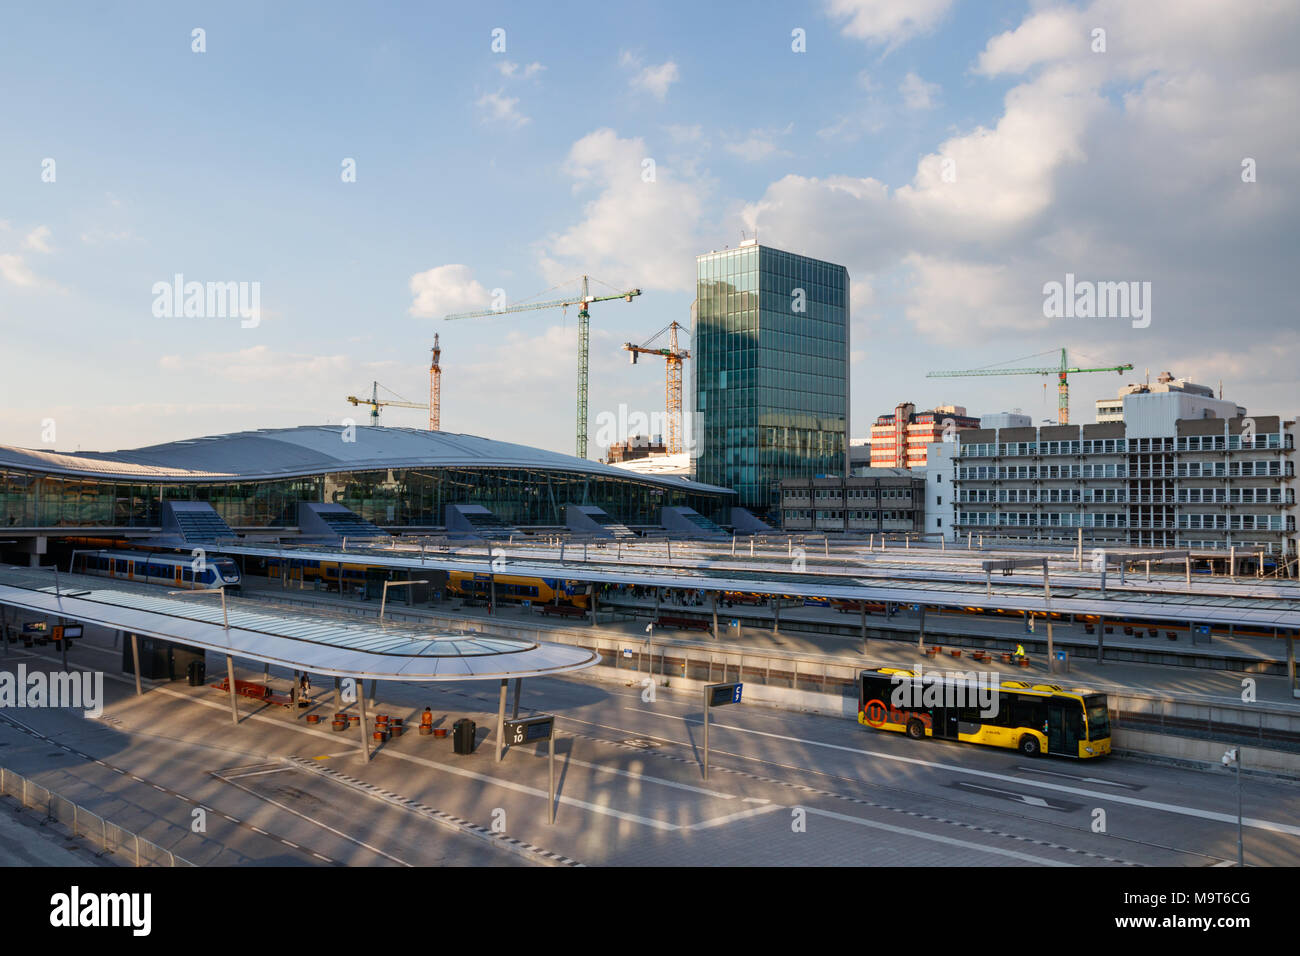 The NS hea quarters, platforms of Utrecht Centraal Railway Station and the bus station with a leaving bus on a sunny day.  Utrecht, The Netherlands. Stock Photo